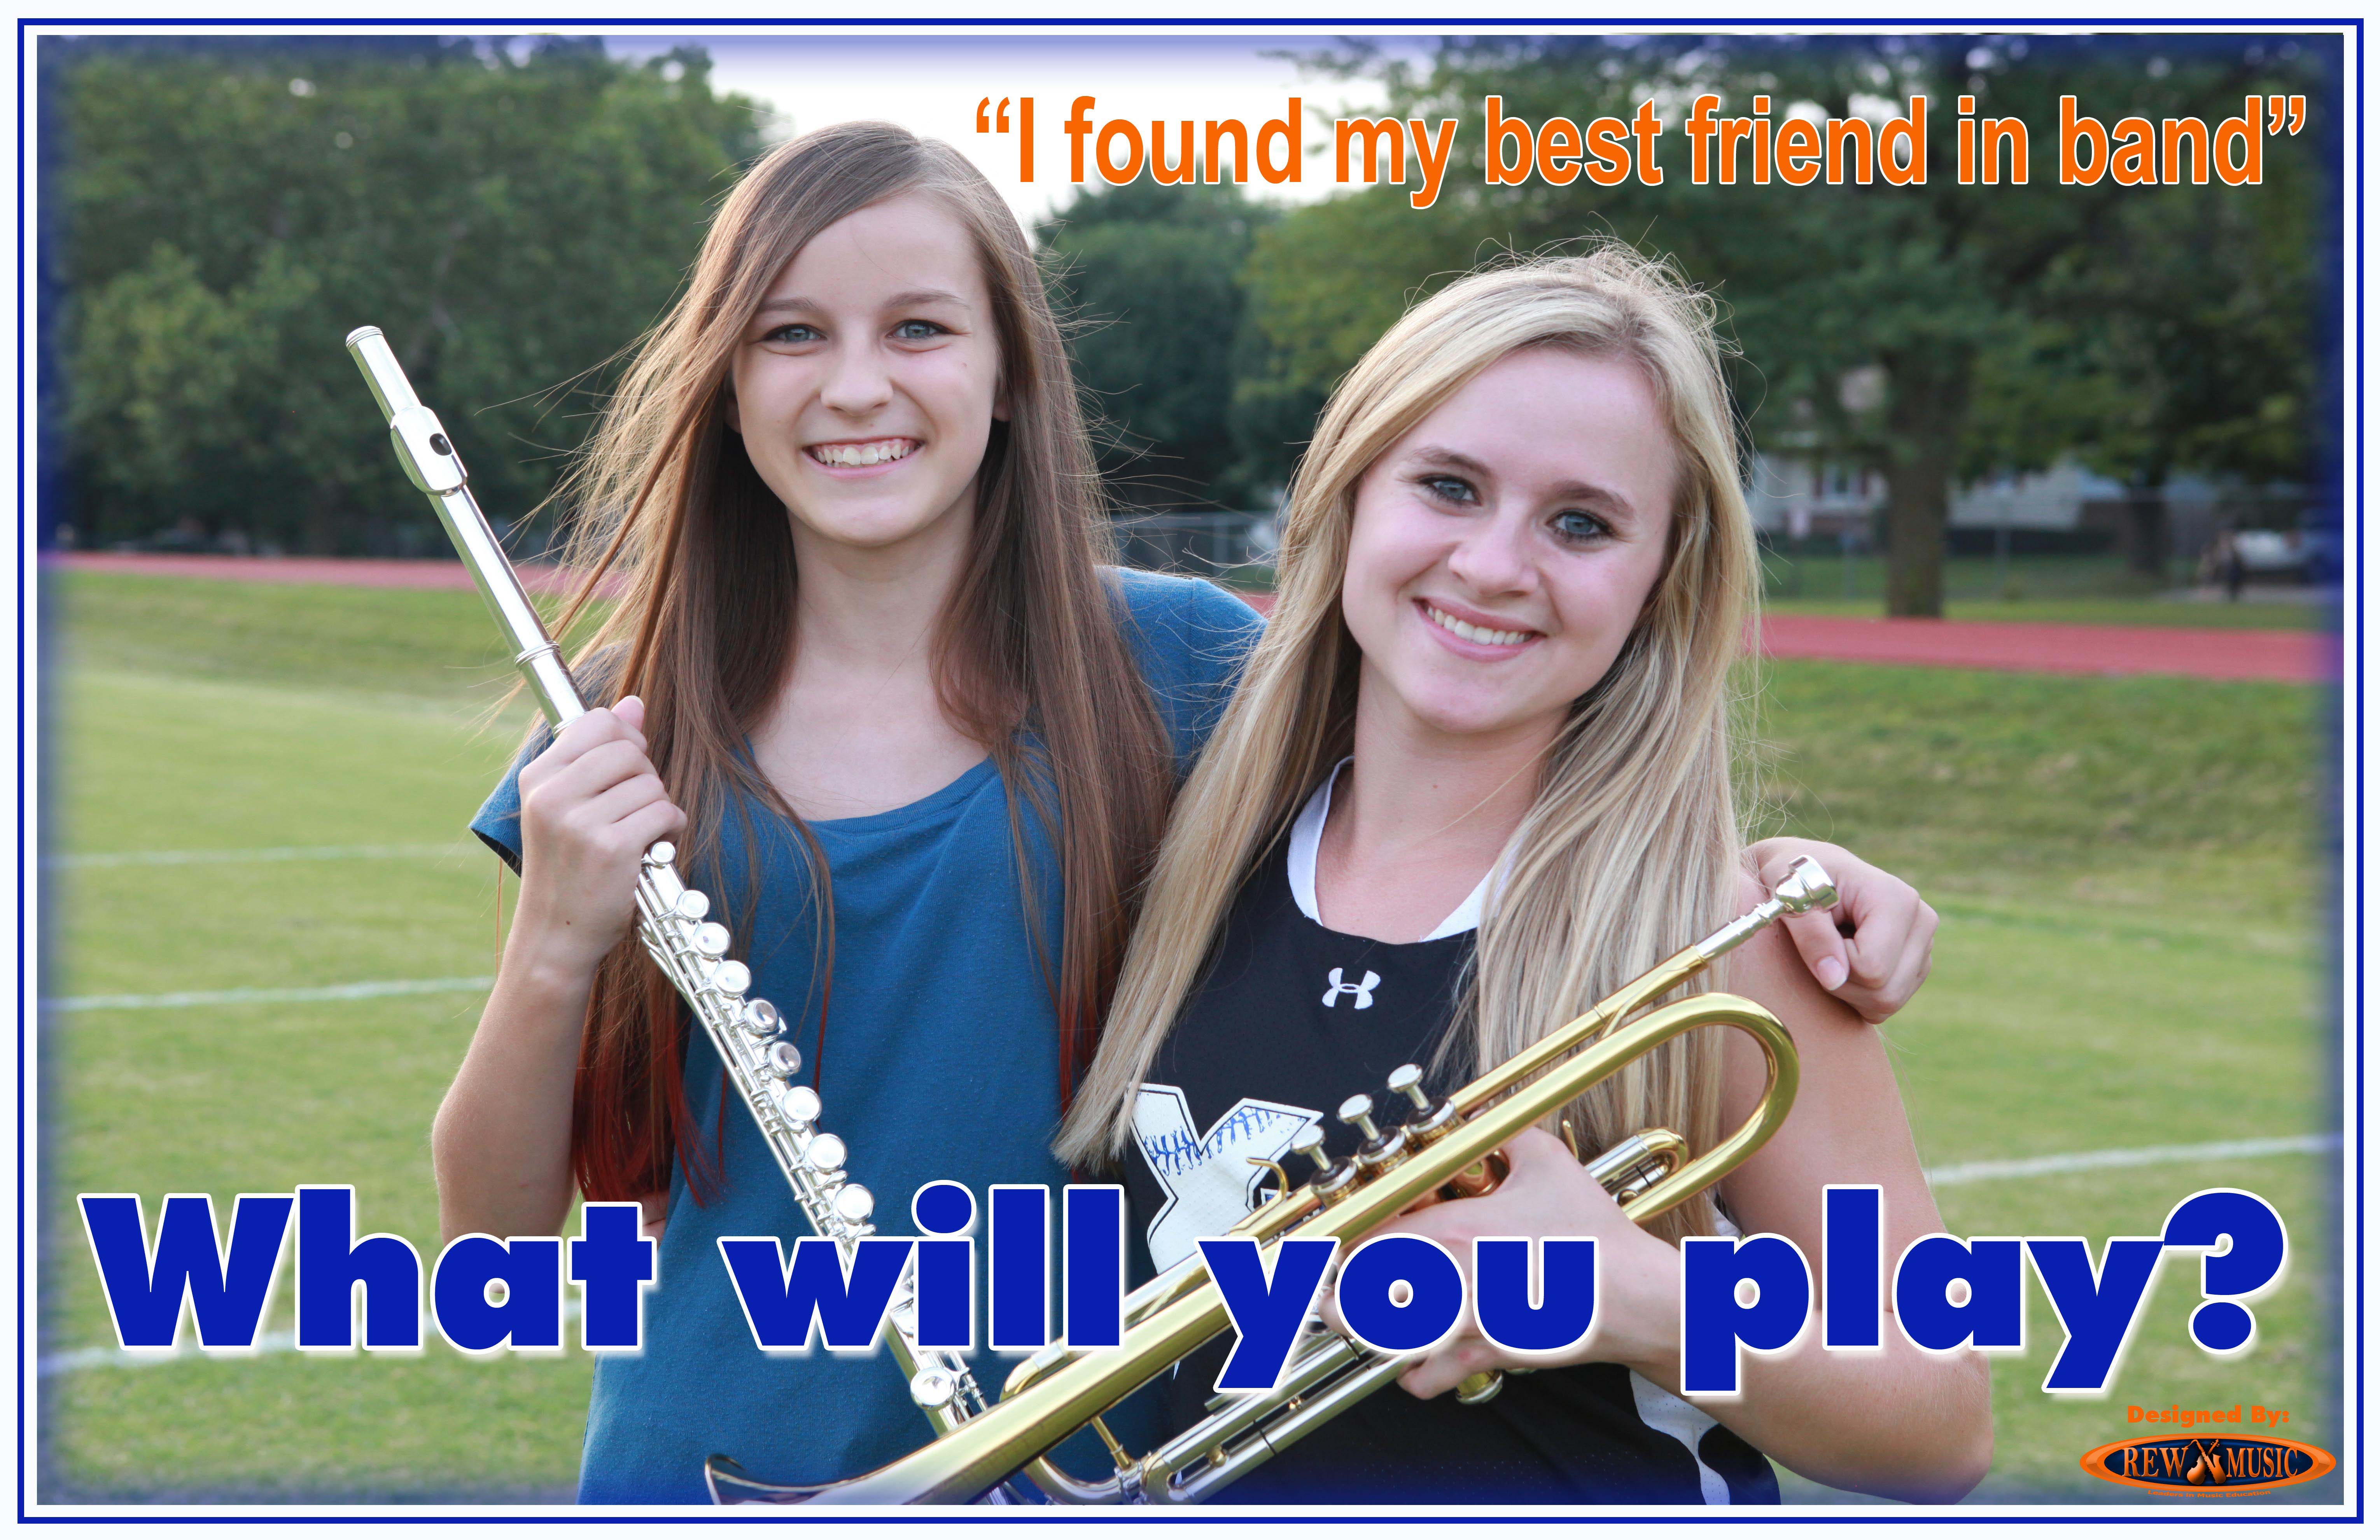 Join the School Band Girls What Will You Play?